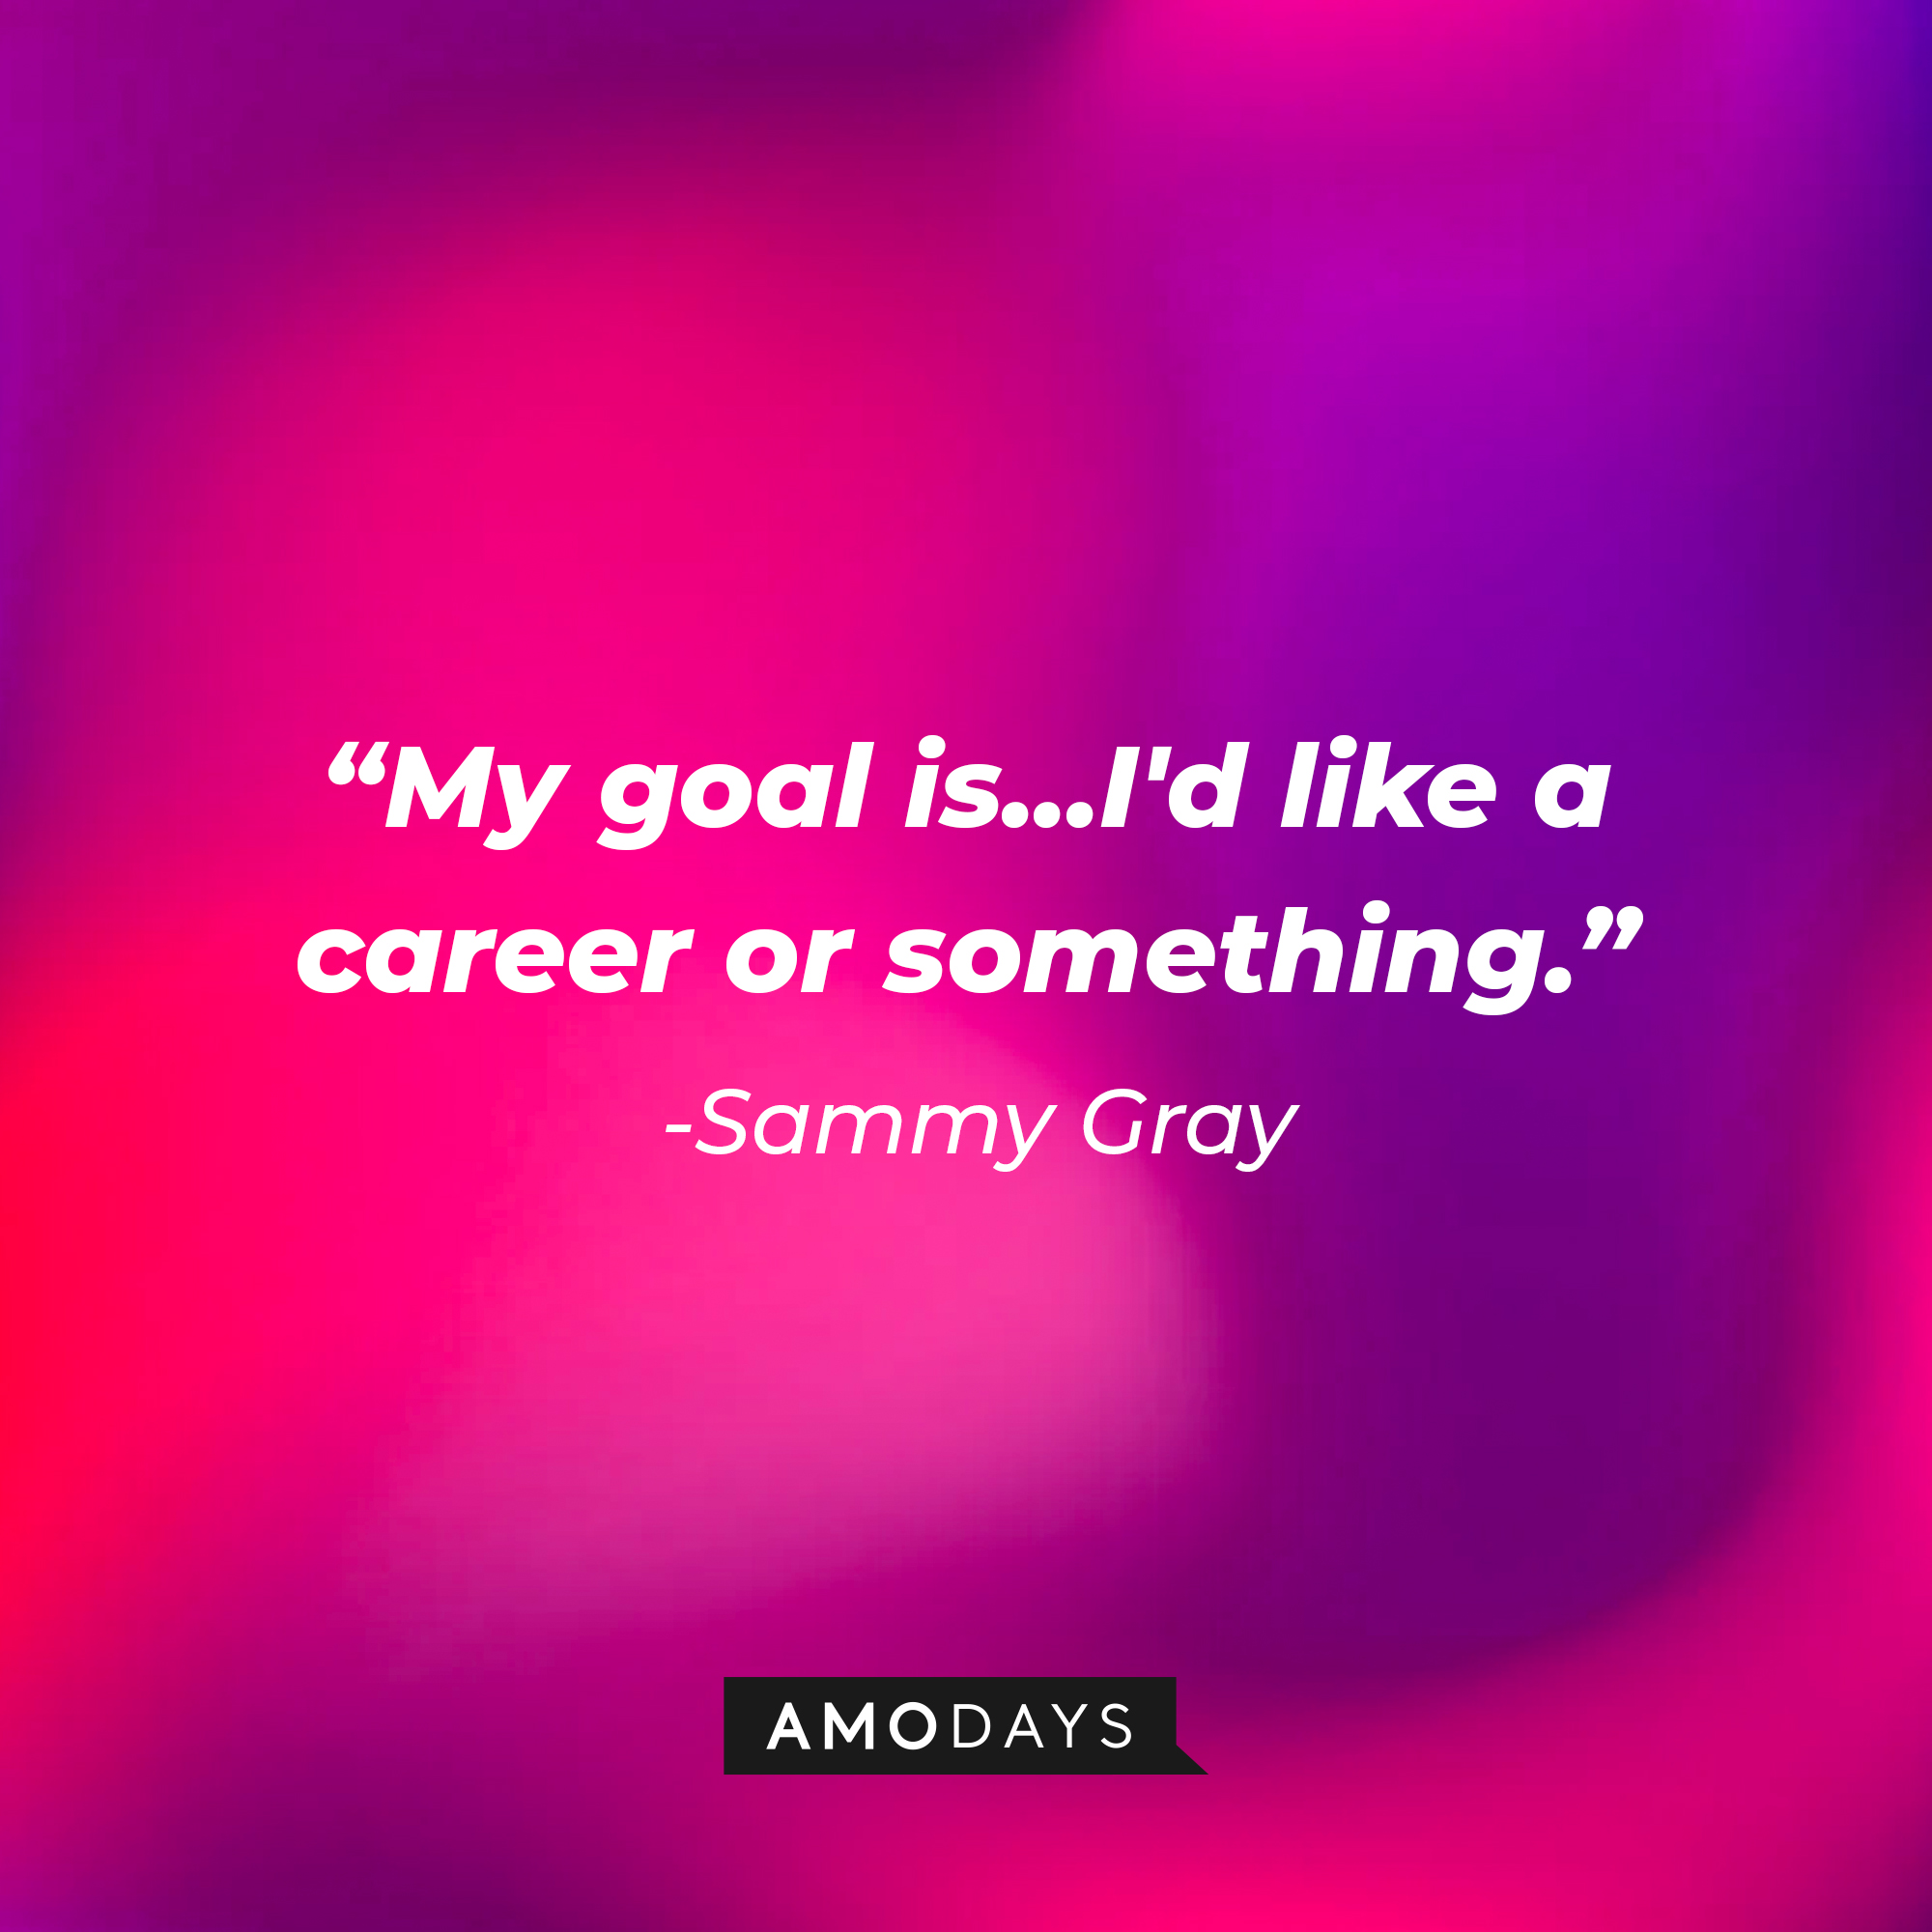 Sammy Gray’s quote: “My goal is...I'd like a career or something.” | Source: AmoDays